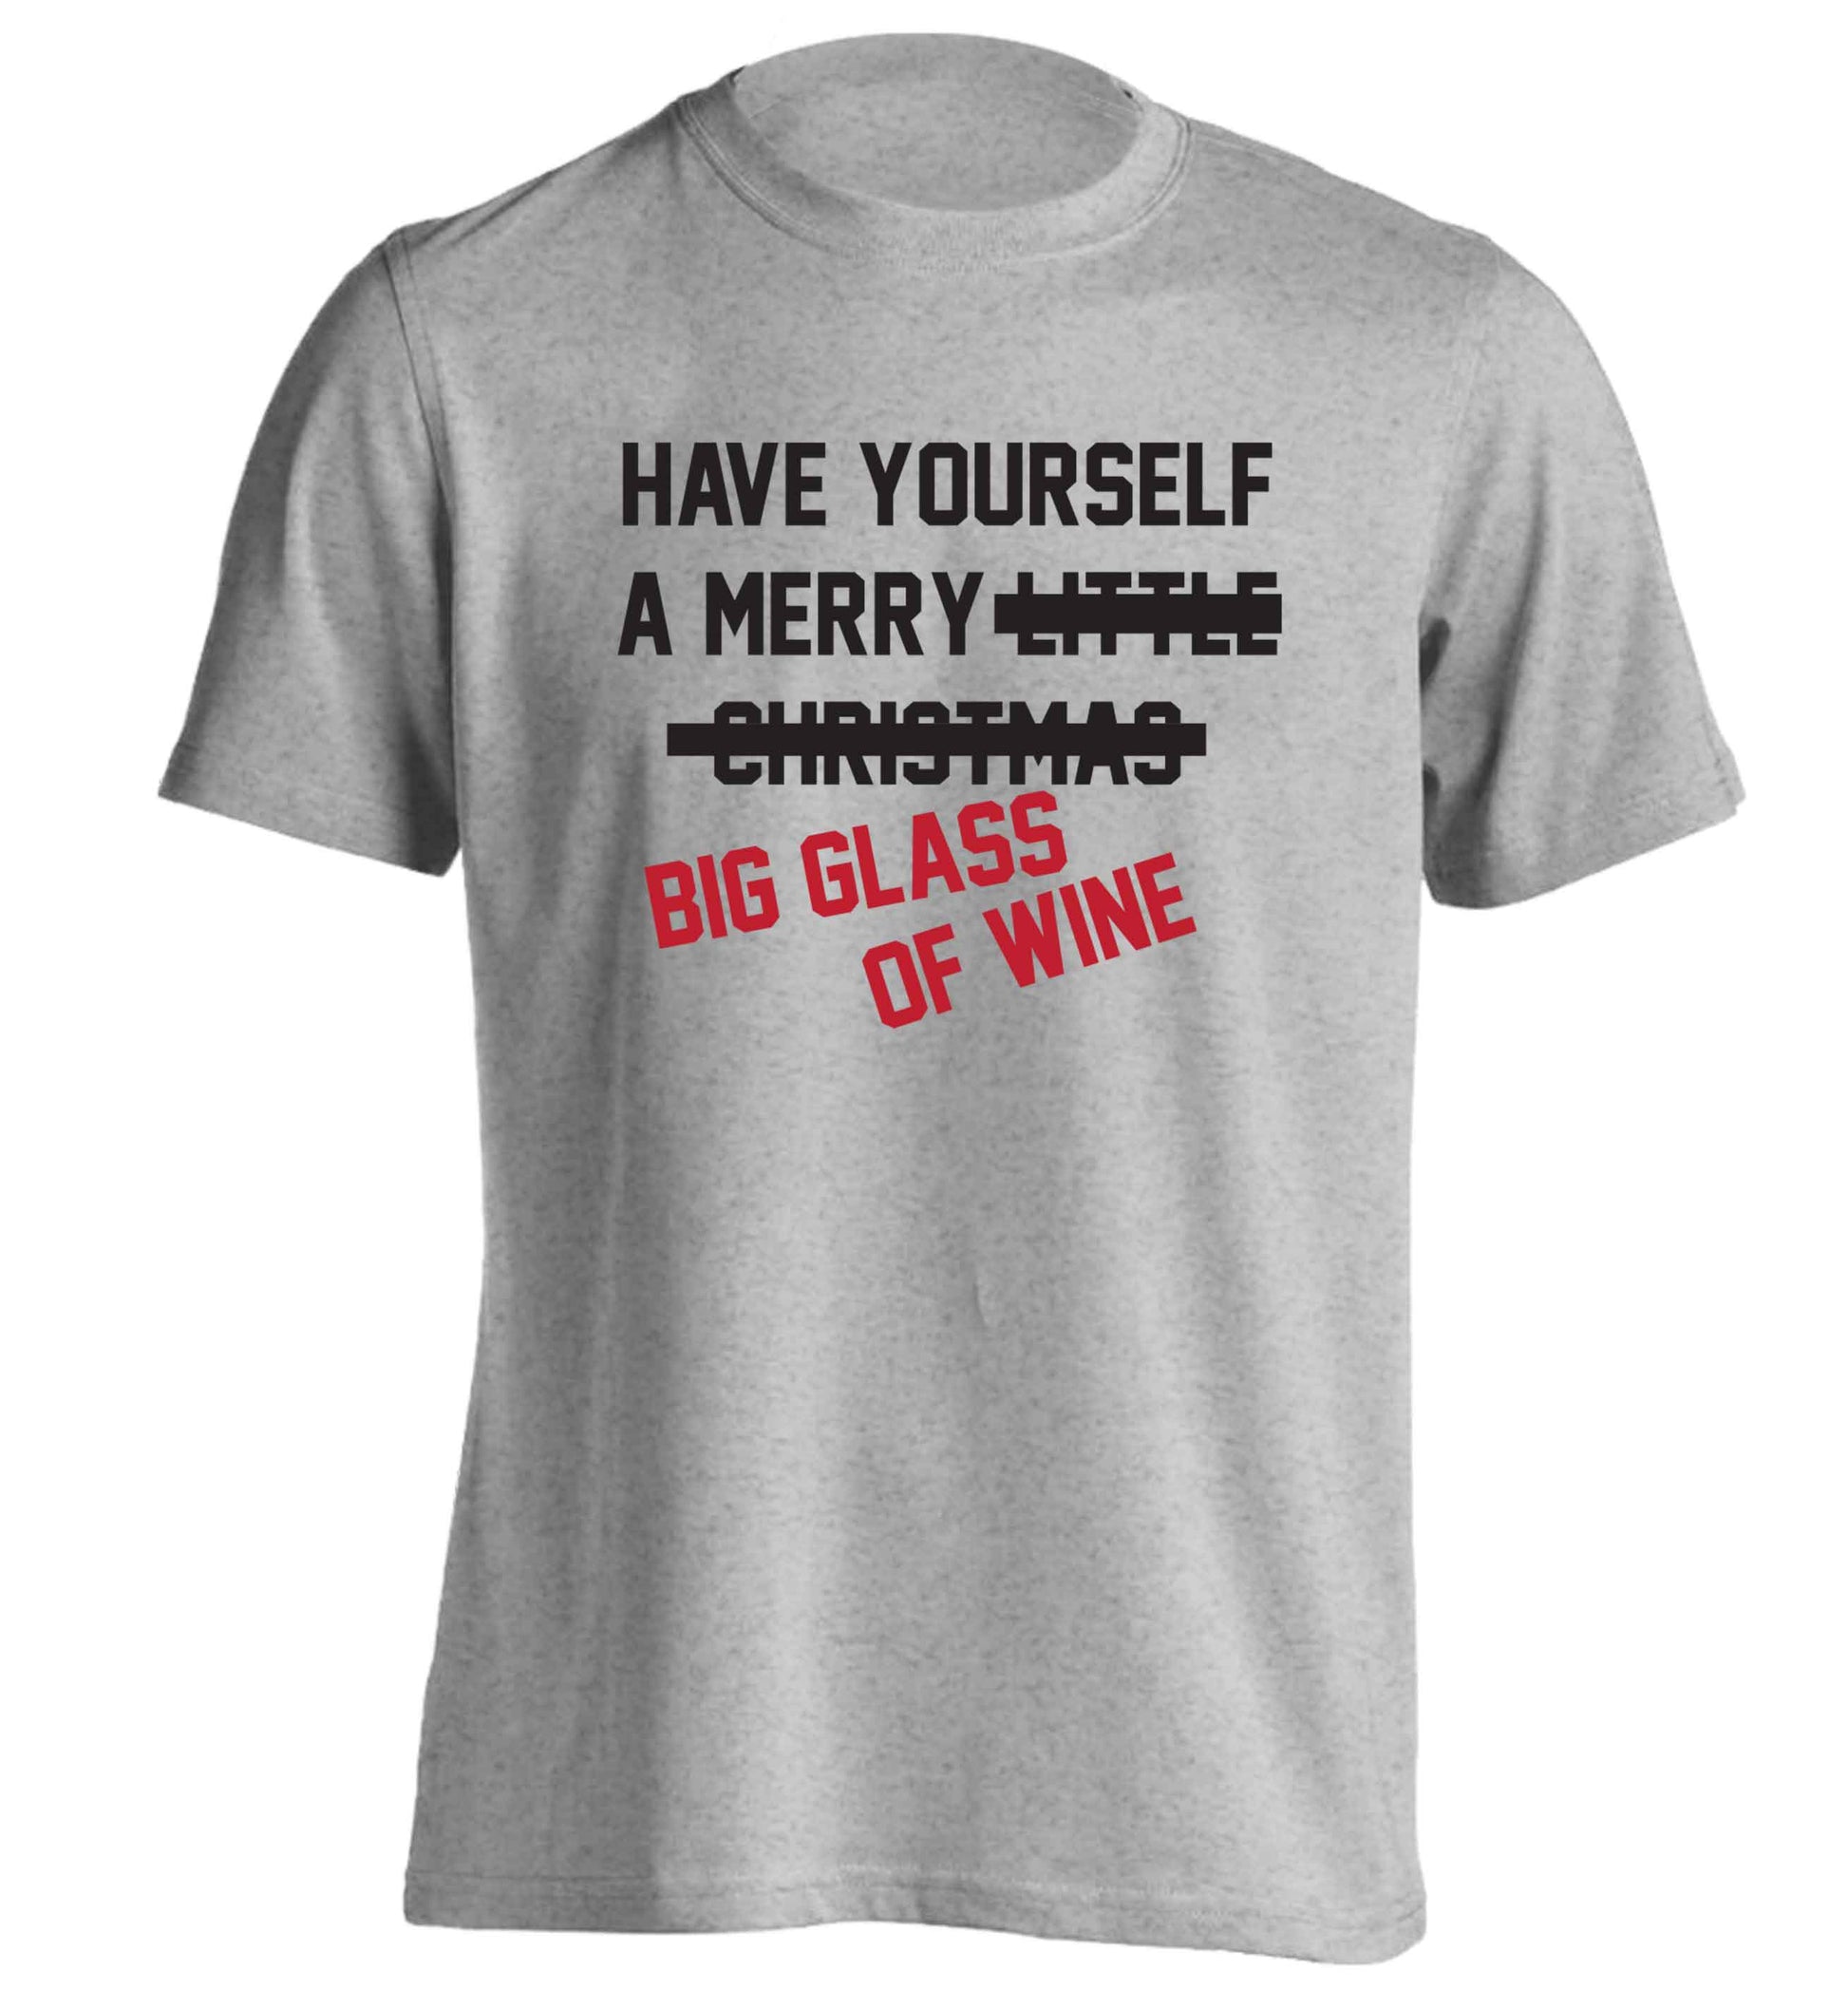 Have yourself a merry big glass of wine adults unisex grey Tshirt 2XL